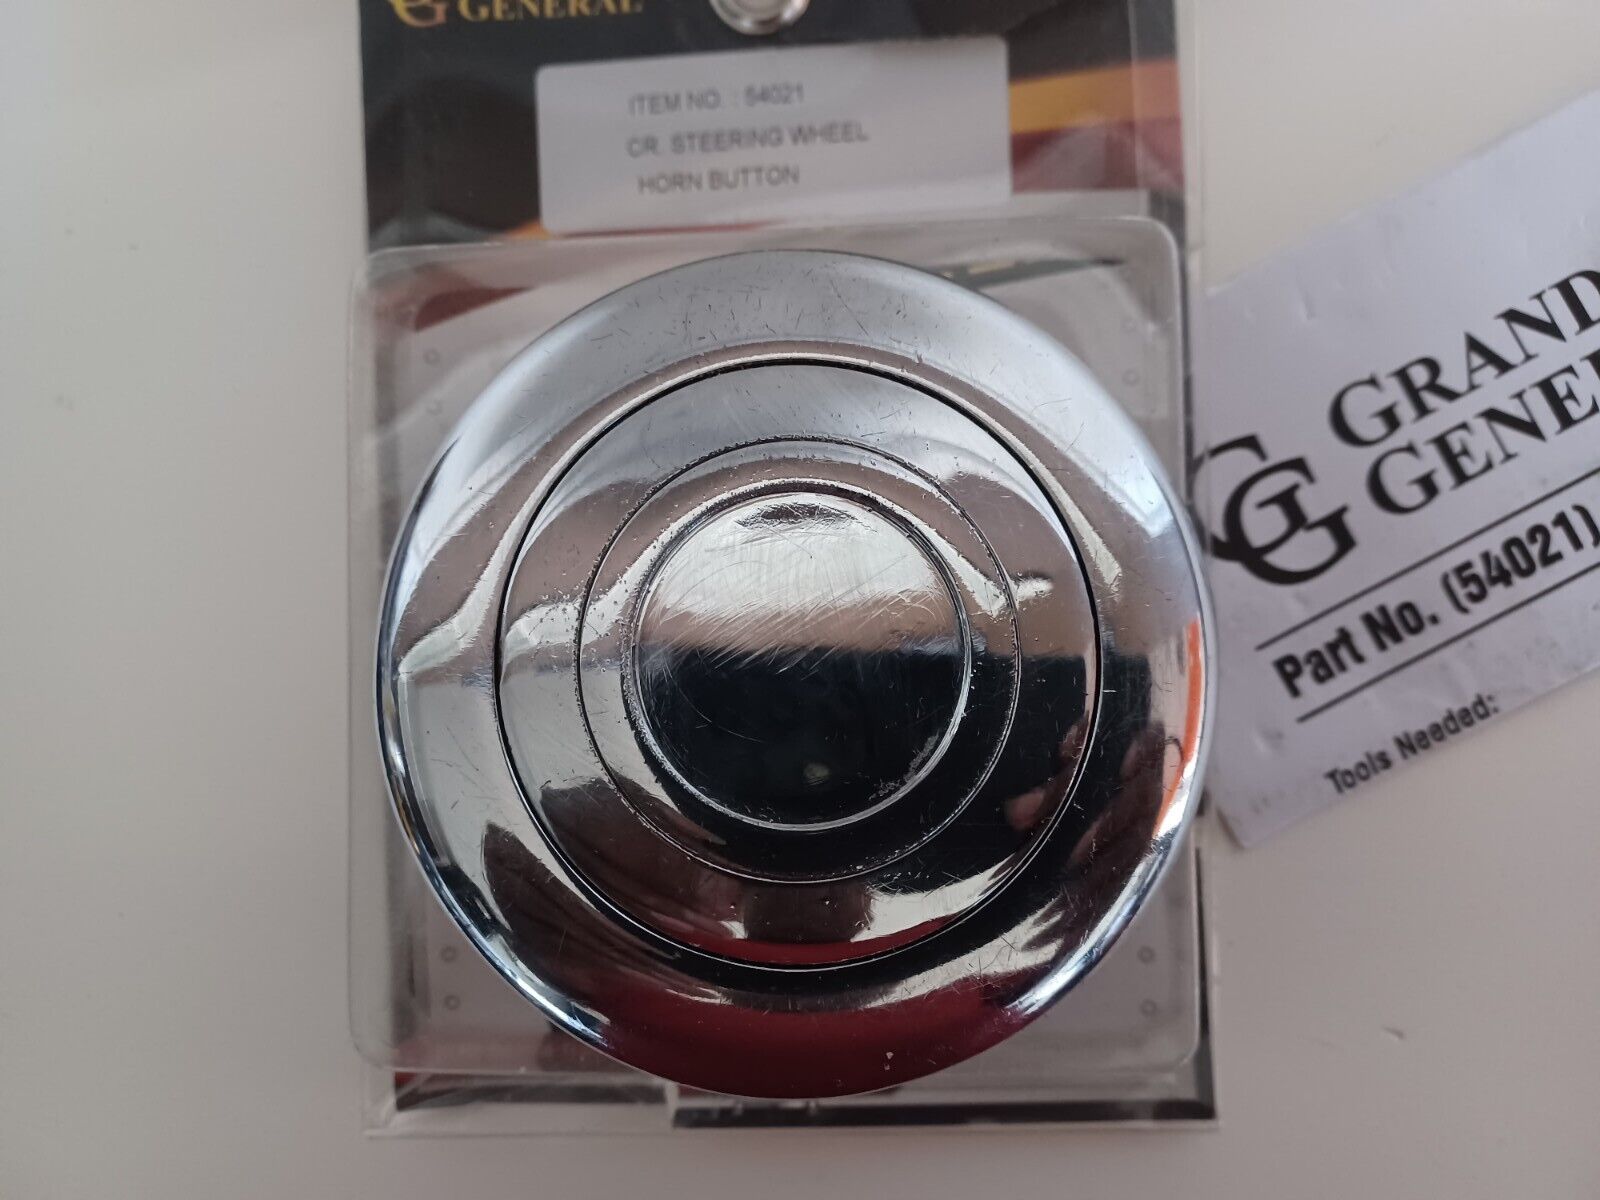 GG Grand General 54021 Chrome Plated Steering Wheel Horn Button